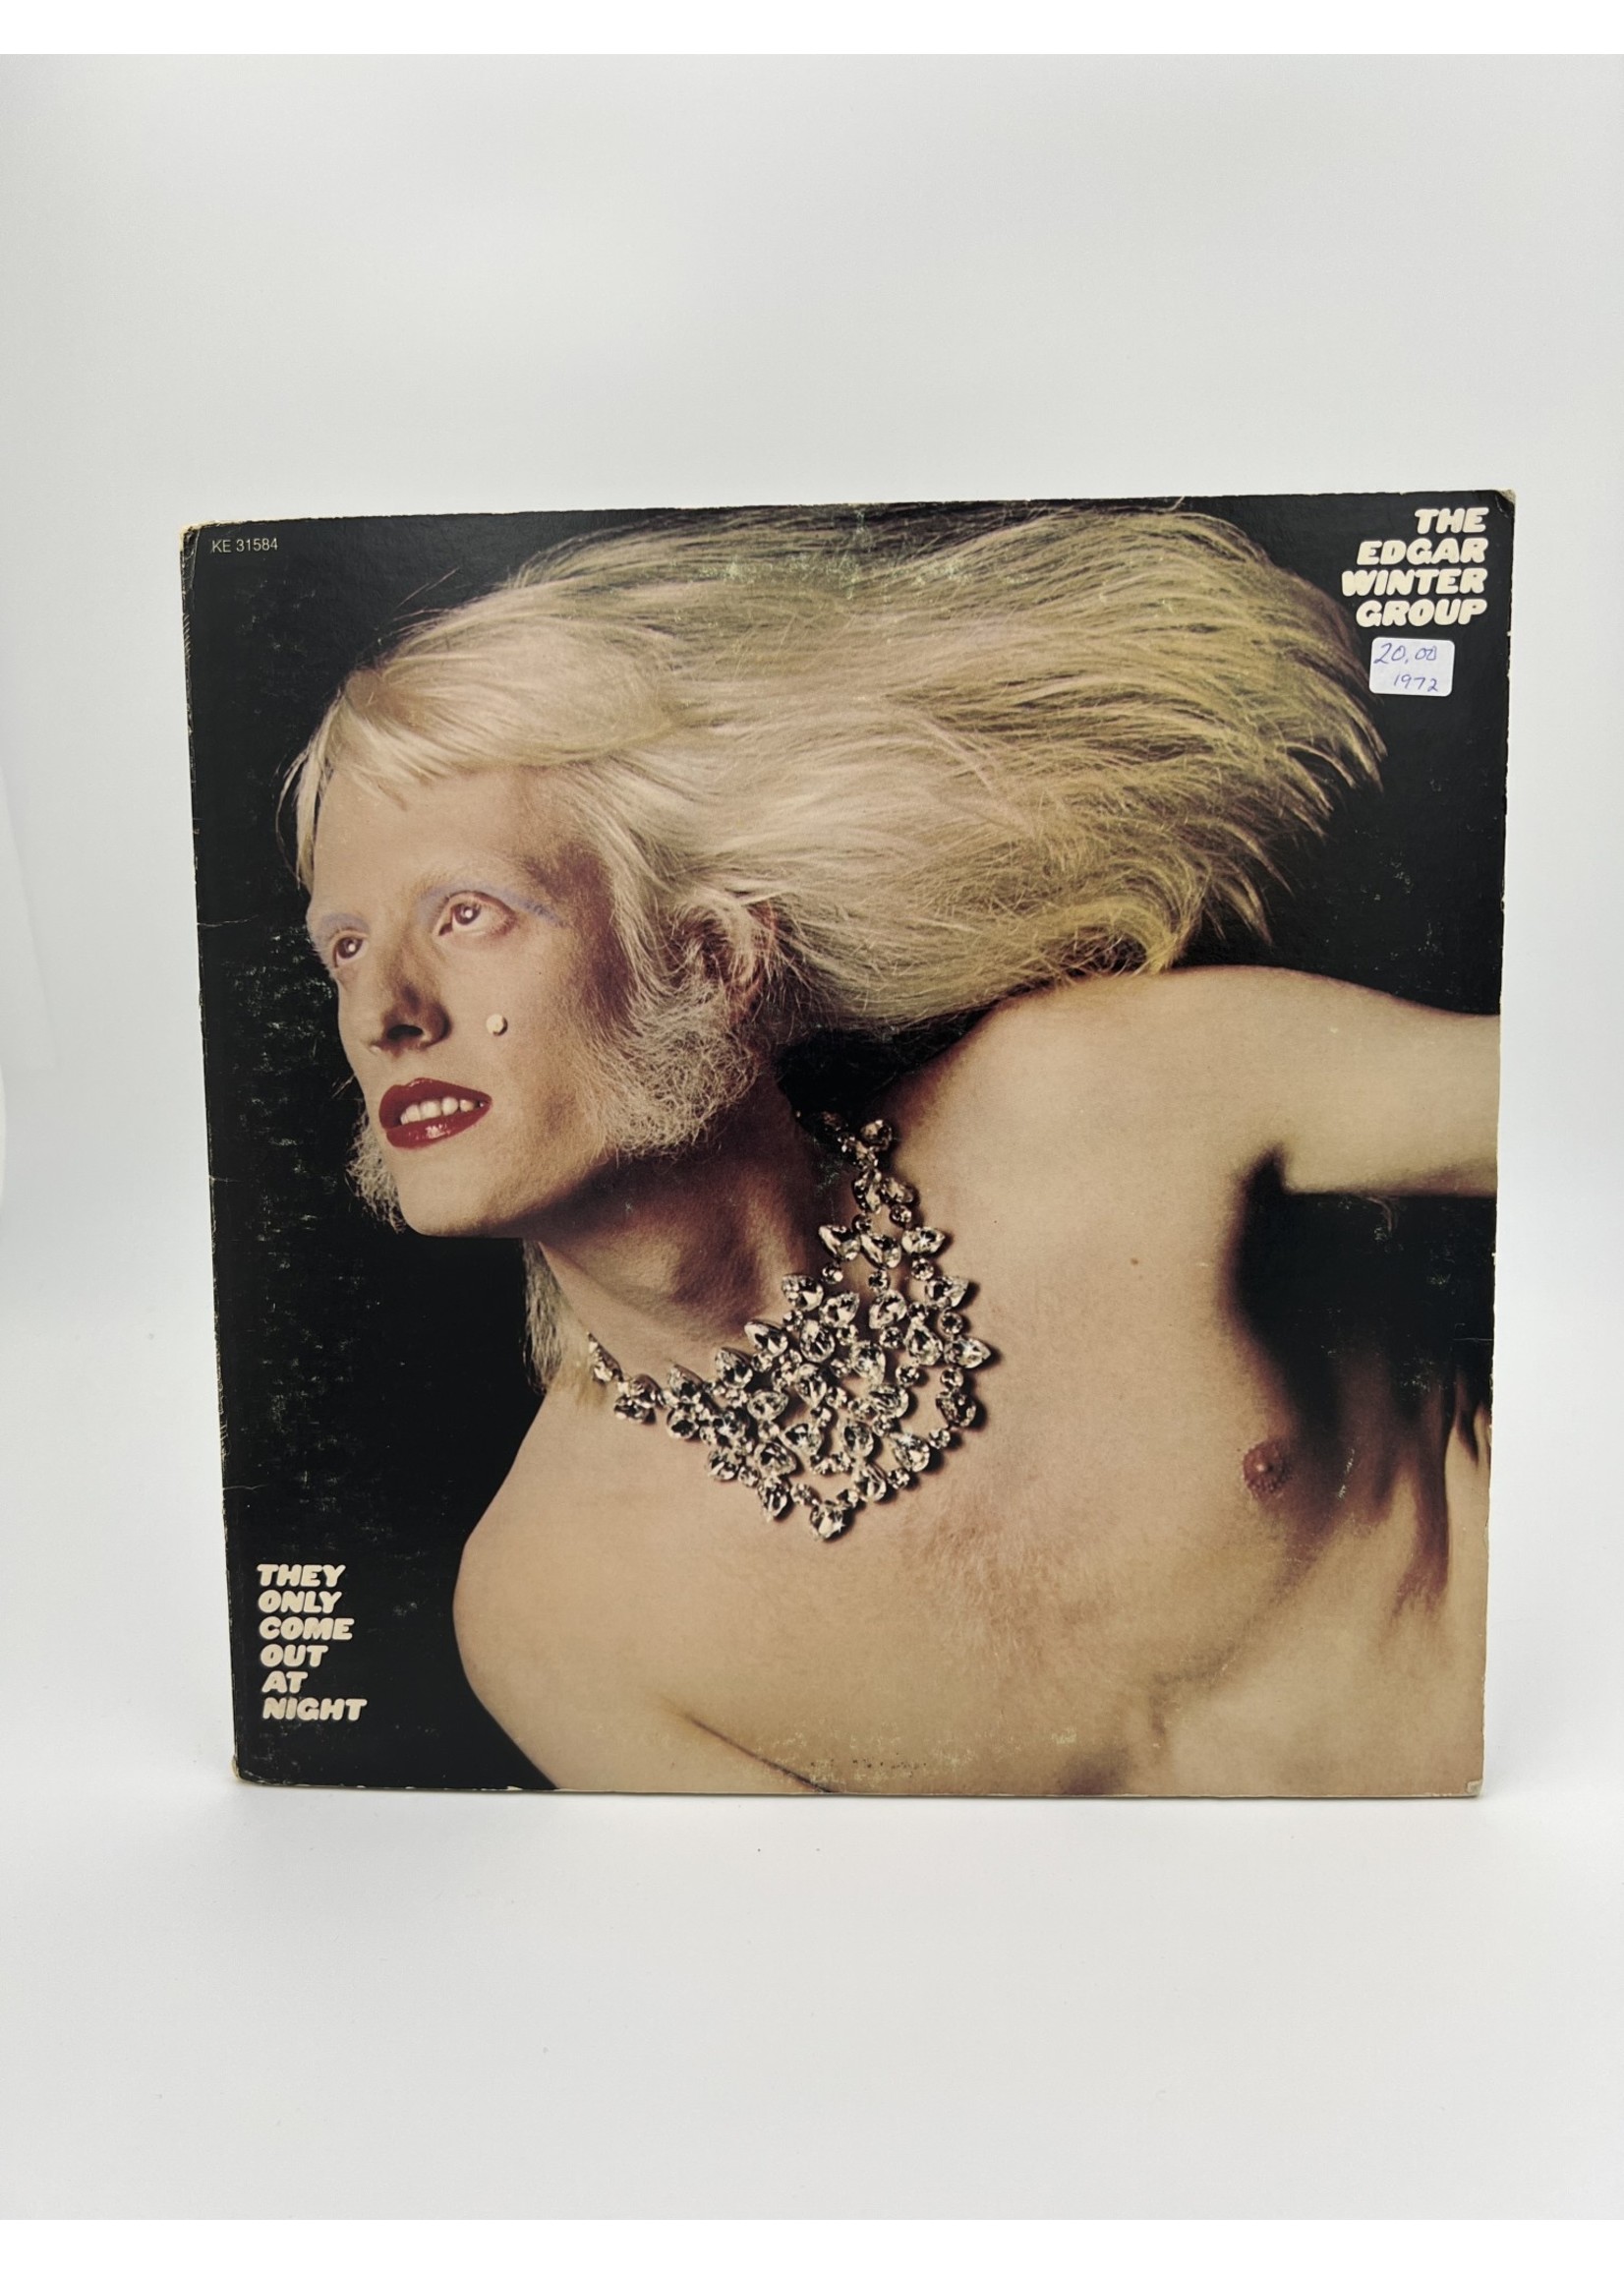 LP The Edgar Winter Group They Only Come Out At Night LP RECORD